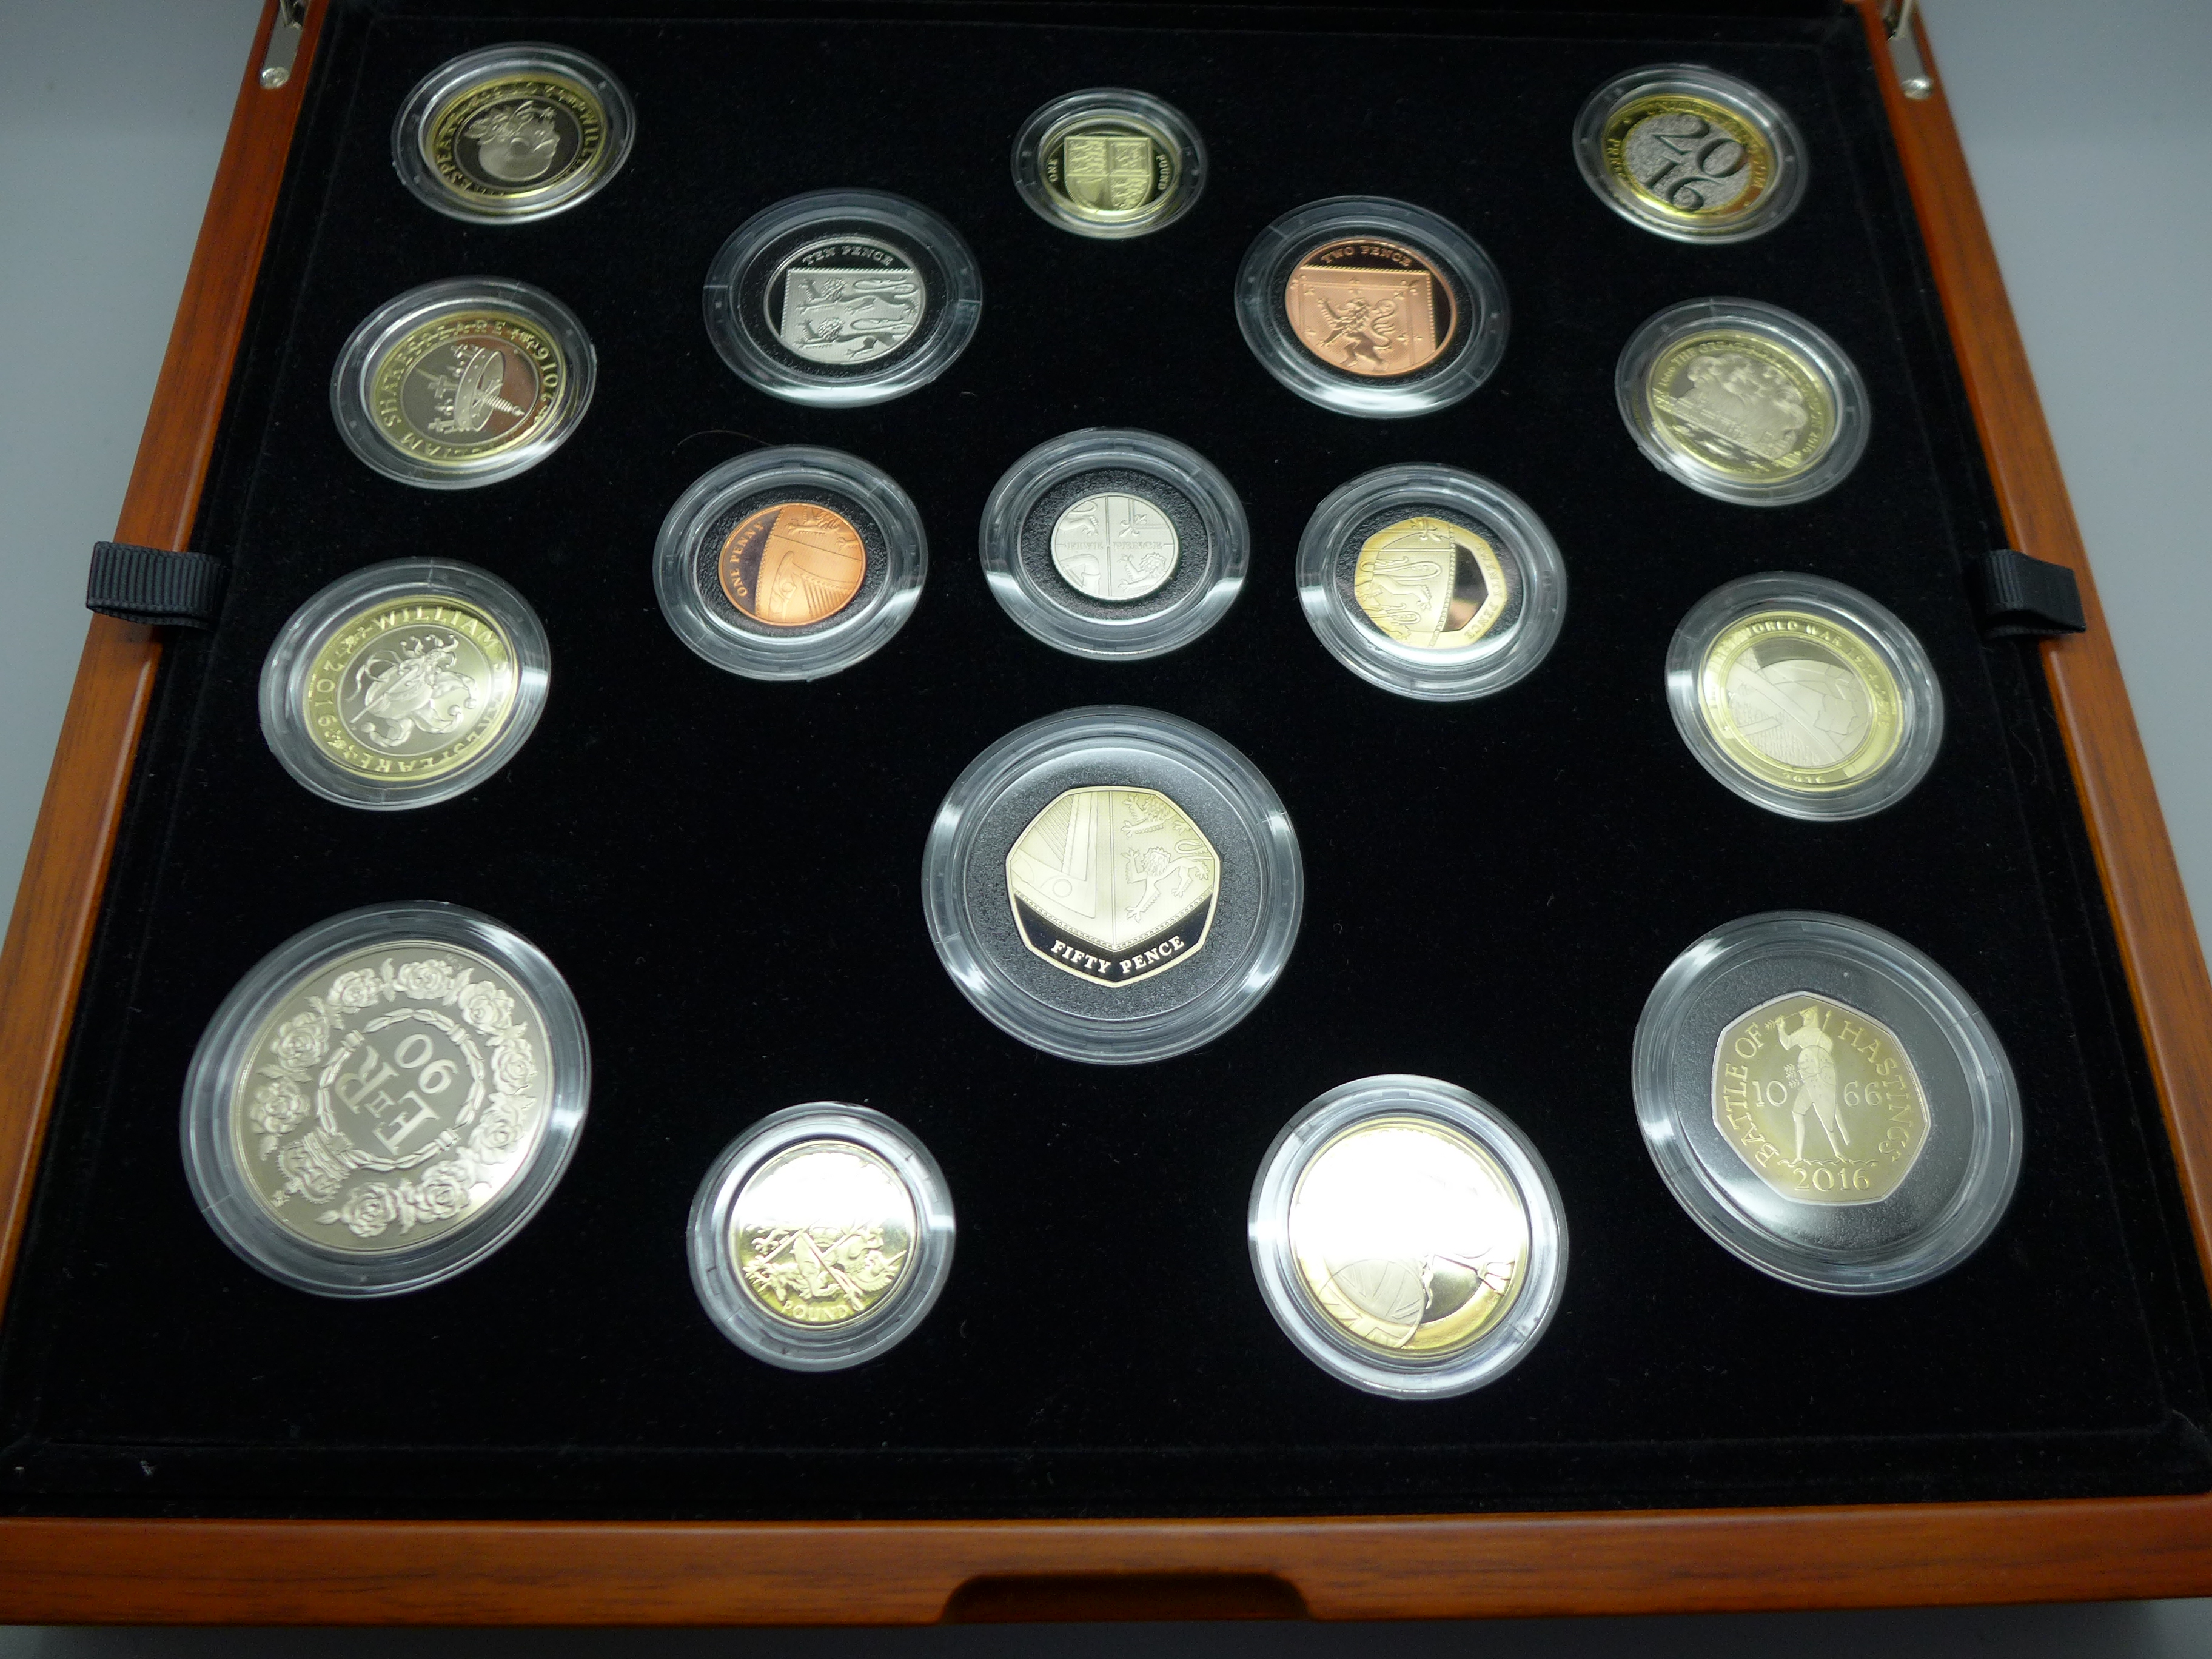 The Royal Mint The 2016 UK Premium Proof Coin Set, Treasure for Life